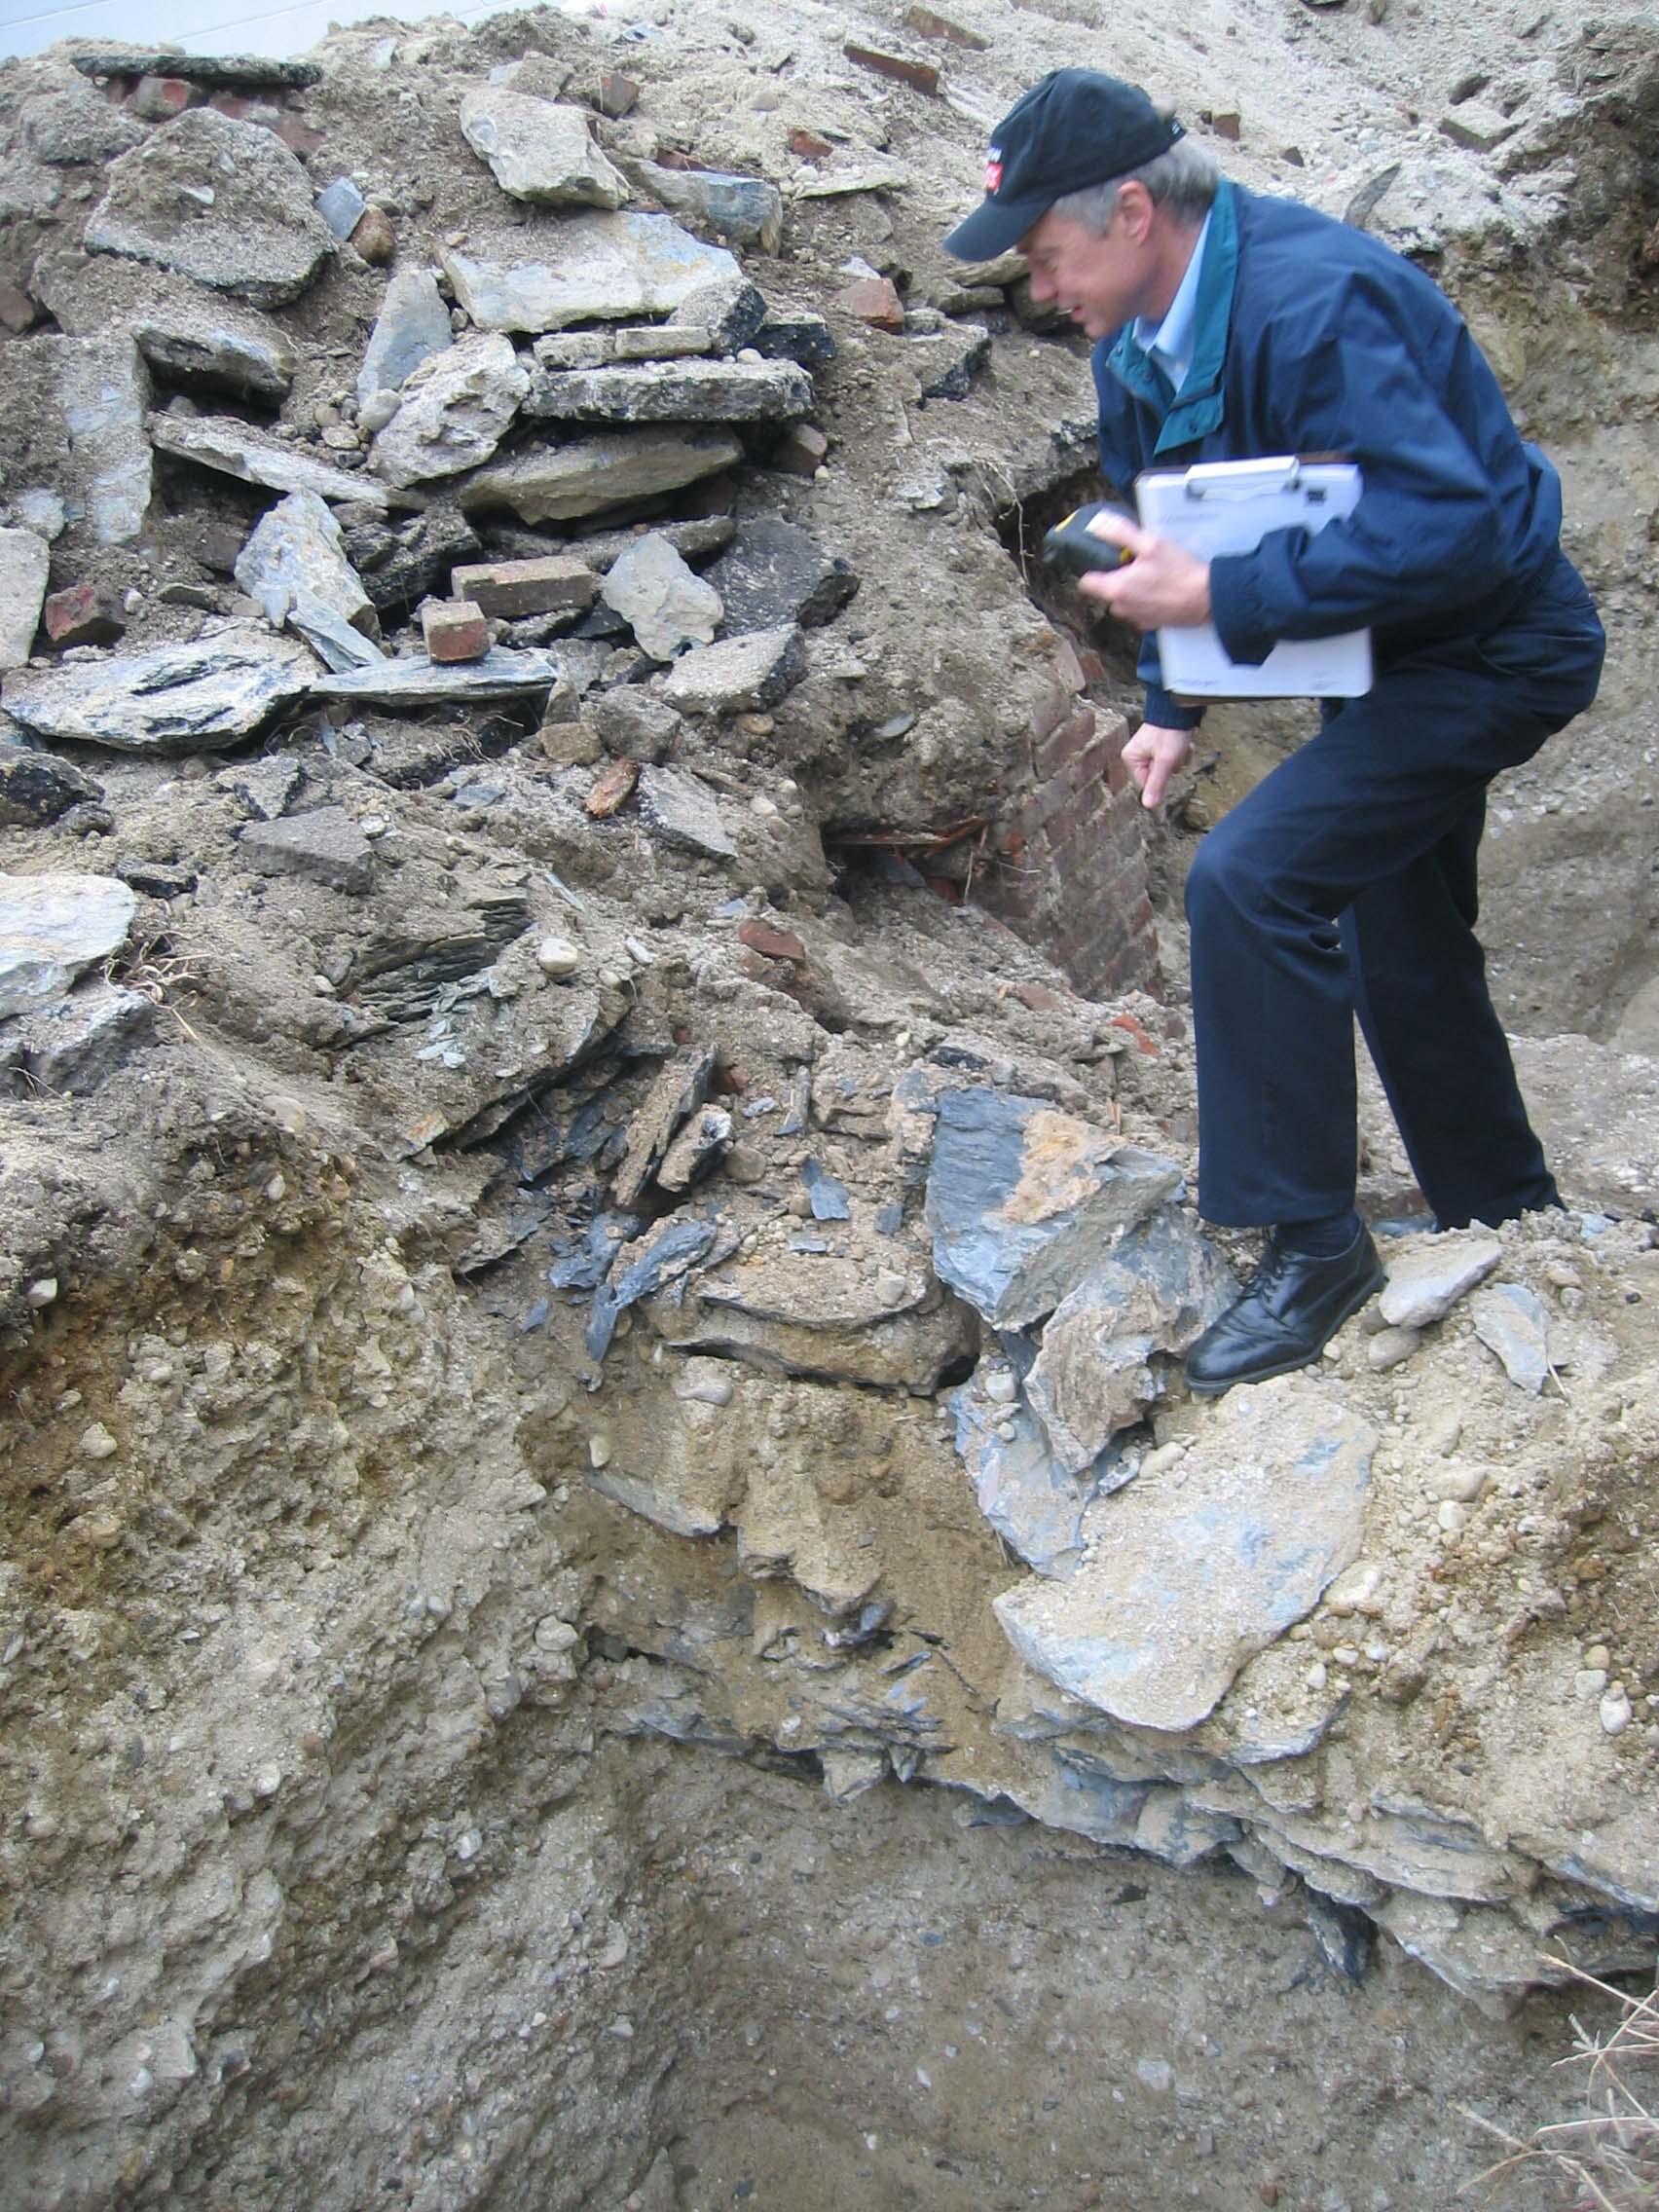  Peter Grafe checking out excavated slate and brick foundations from a Victorian homestead that once stood at 1577. A piece of copper from the original home was also found.  Photo courtesy of KITE Architects  